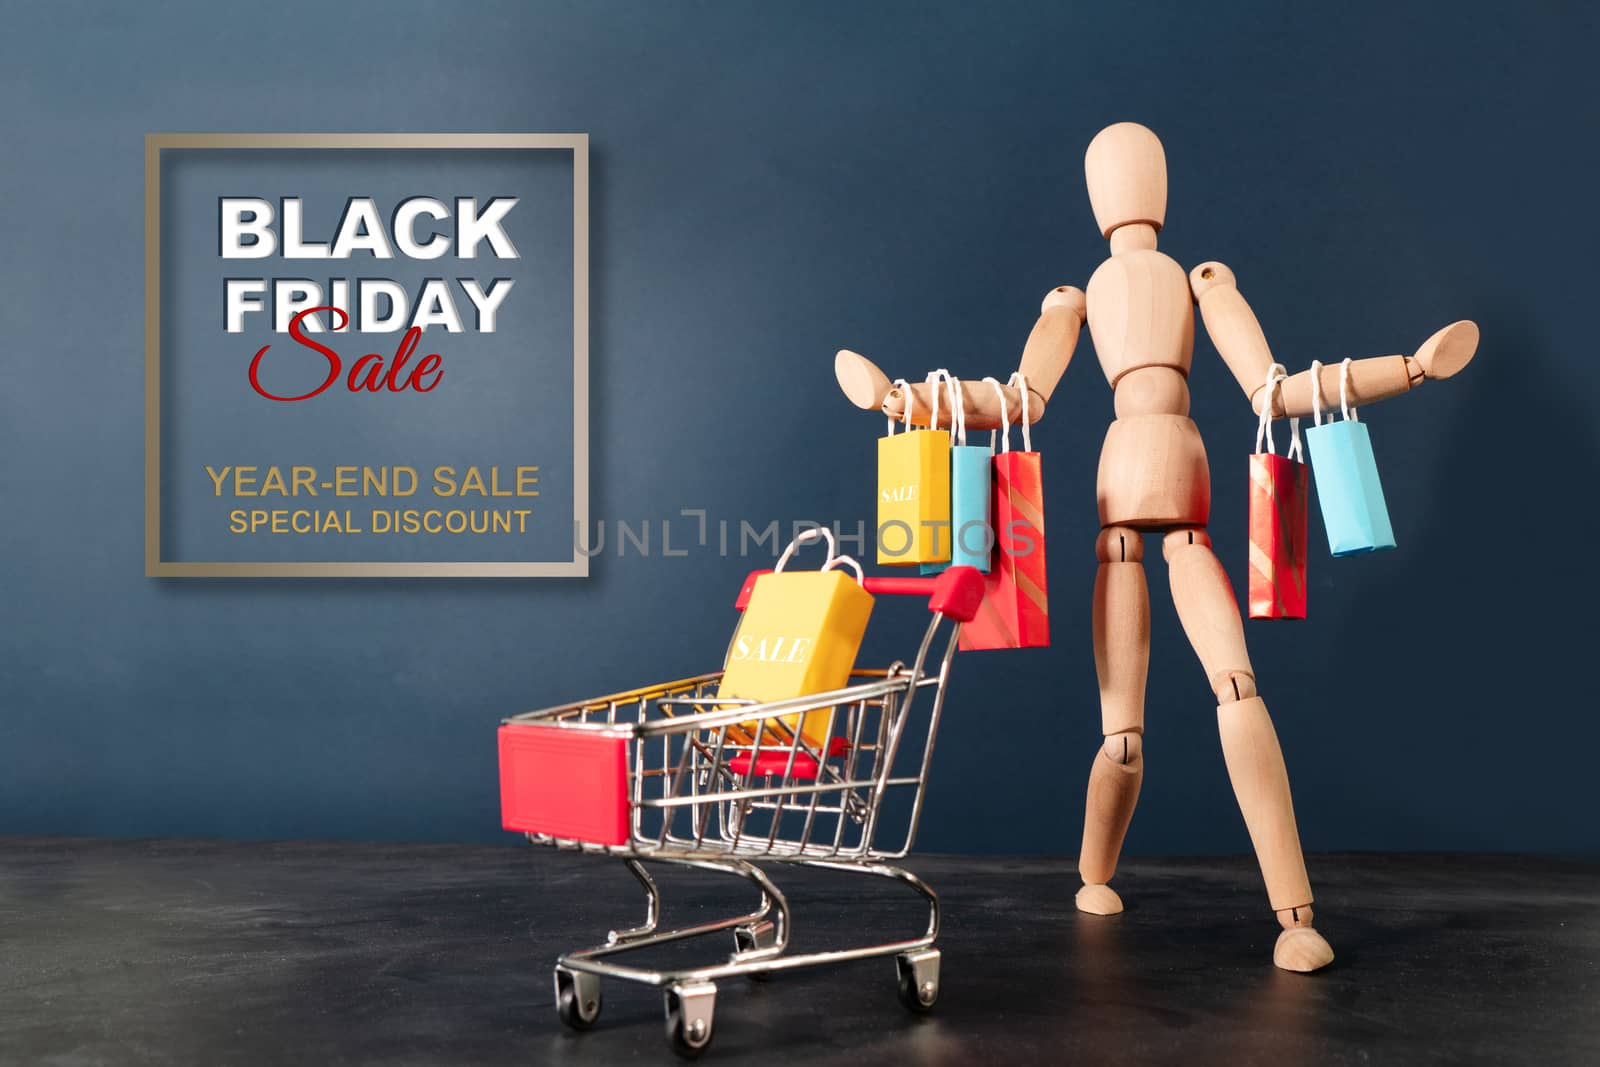 Black Friday sale, wooden doll sitting on shopping cart with sho by psodaz